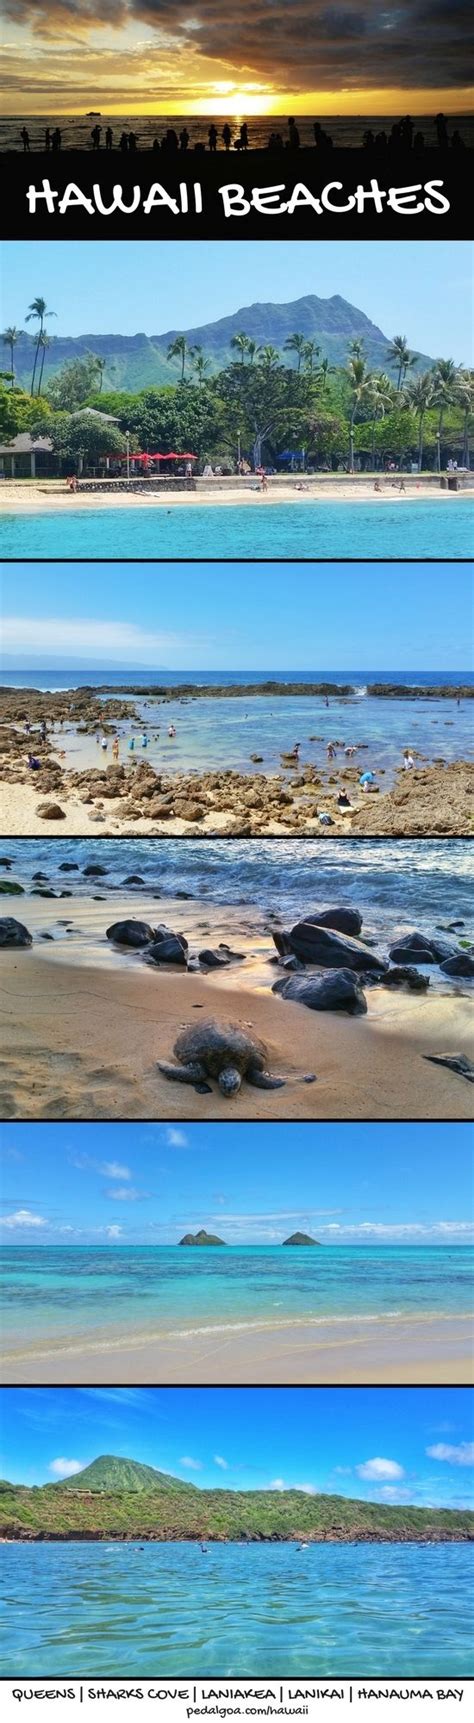 For Us Beaches In Hawaii There Are Activities Like Swimming